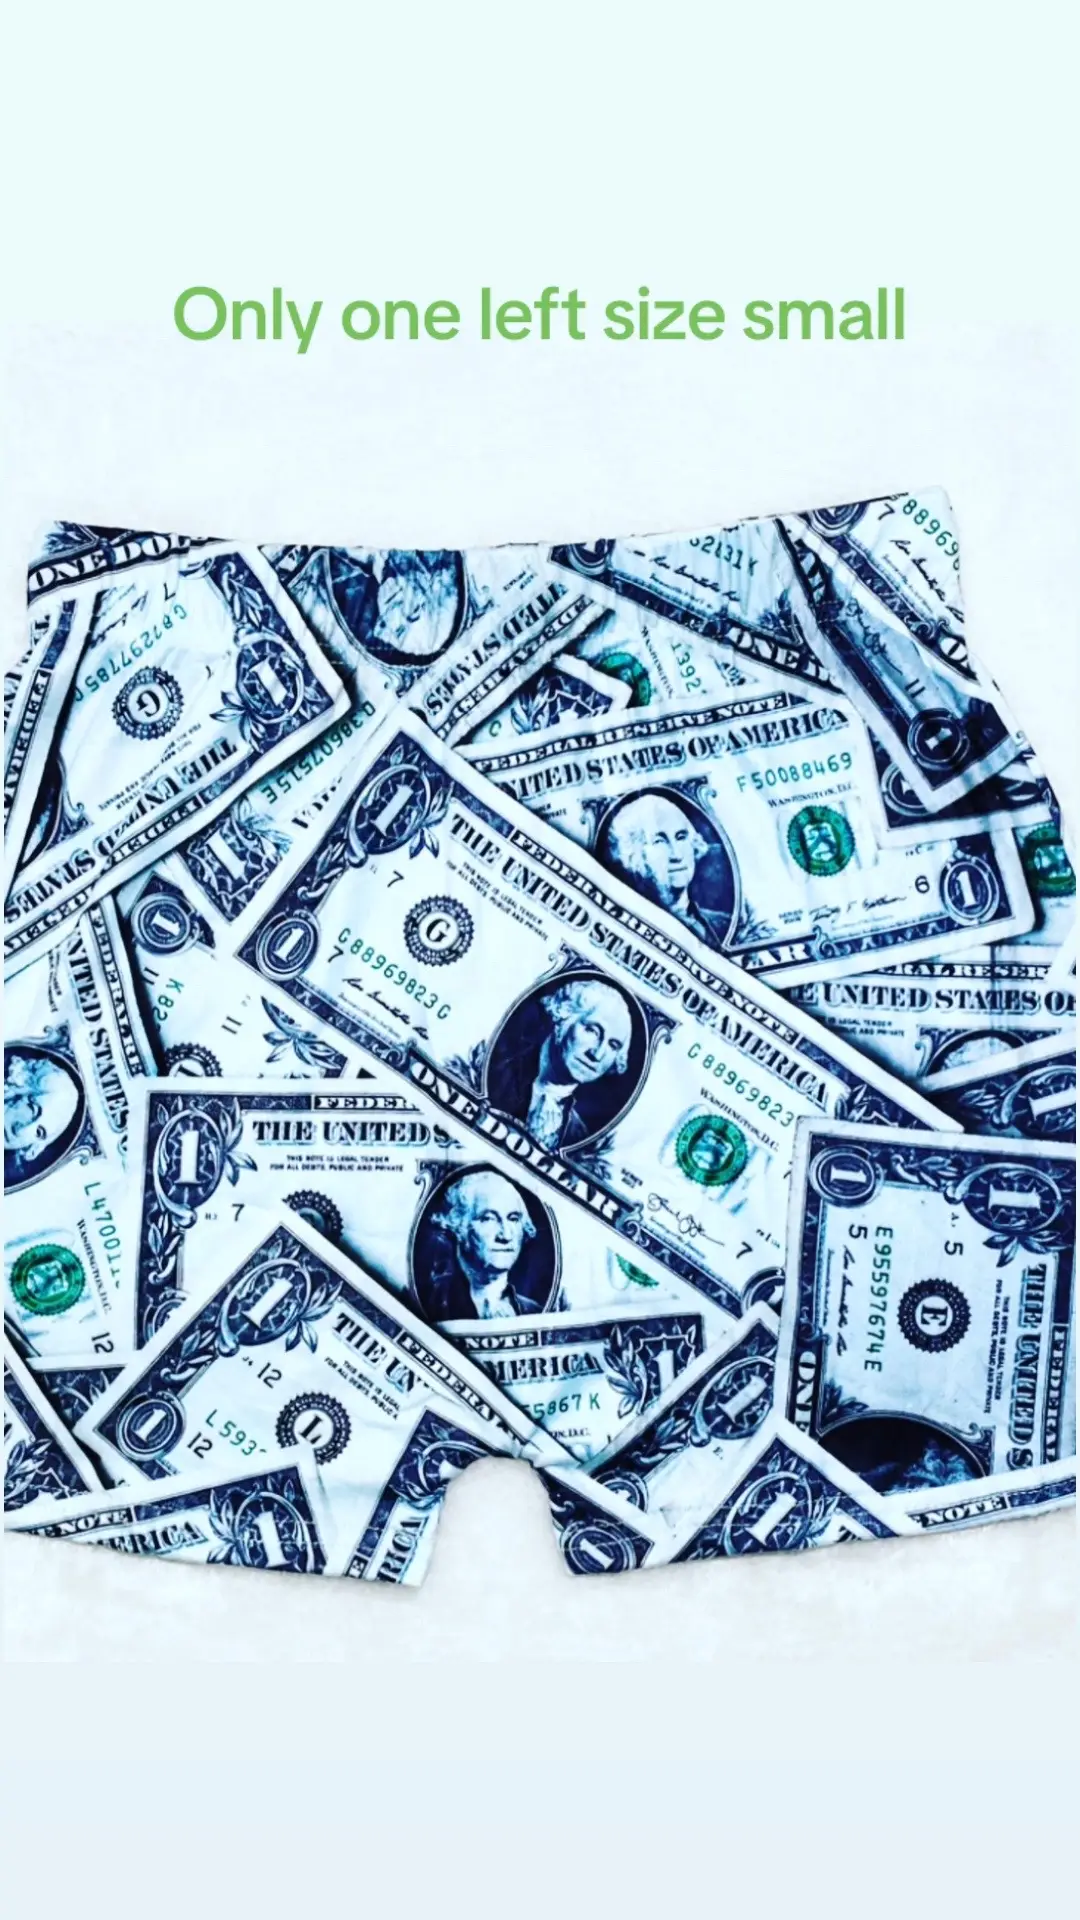 Get to the website now booty shorts are almost gone. The money grab booty shorts are only available in size small. Last chance to get you a pair! Visit chillfactory2021.com now #shop #shorts #moneygrab #dollar #pajamas 